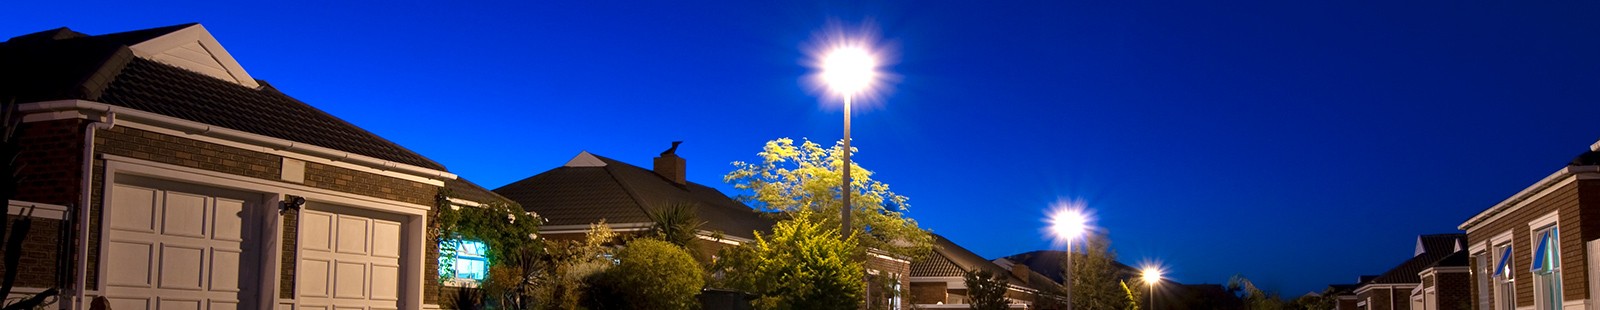 Street view of homes at night with streetlamps